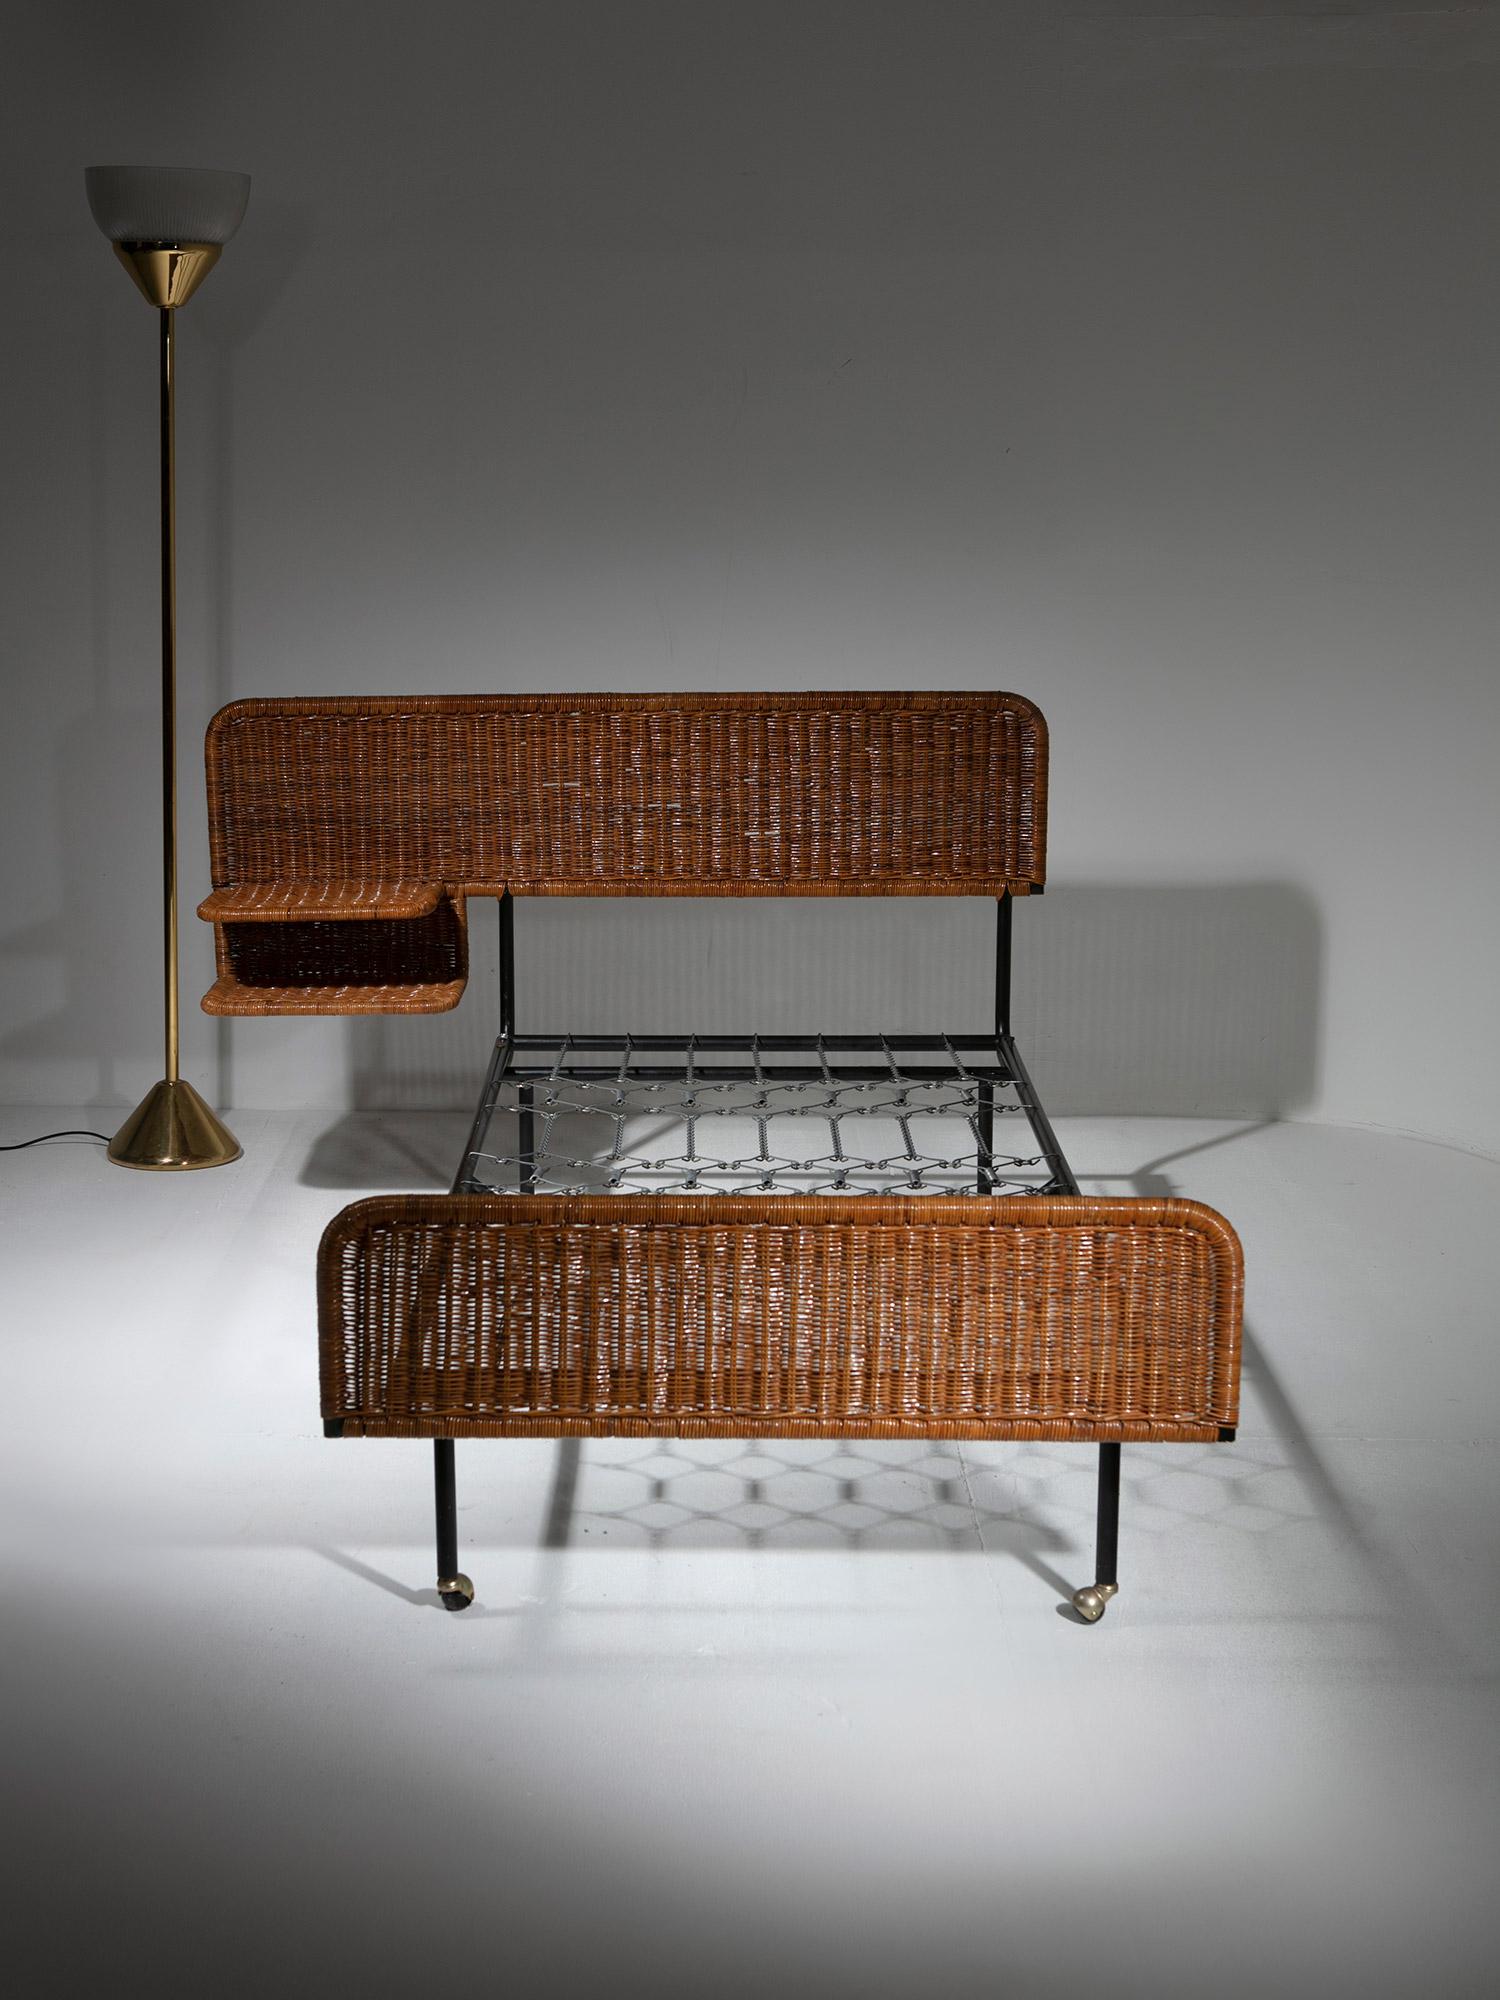 Minimal Metal and Wicker Single Bed with Integrated Shelves, Italy, 1960s For Sale 3